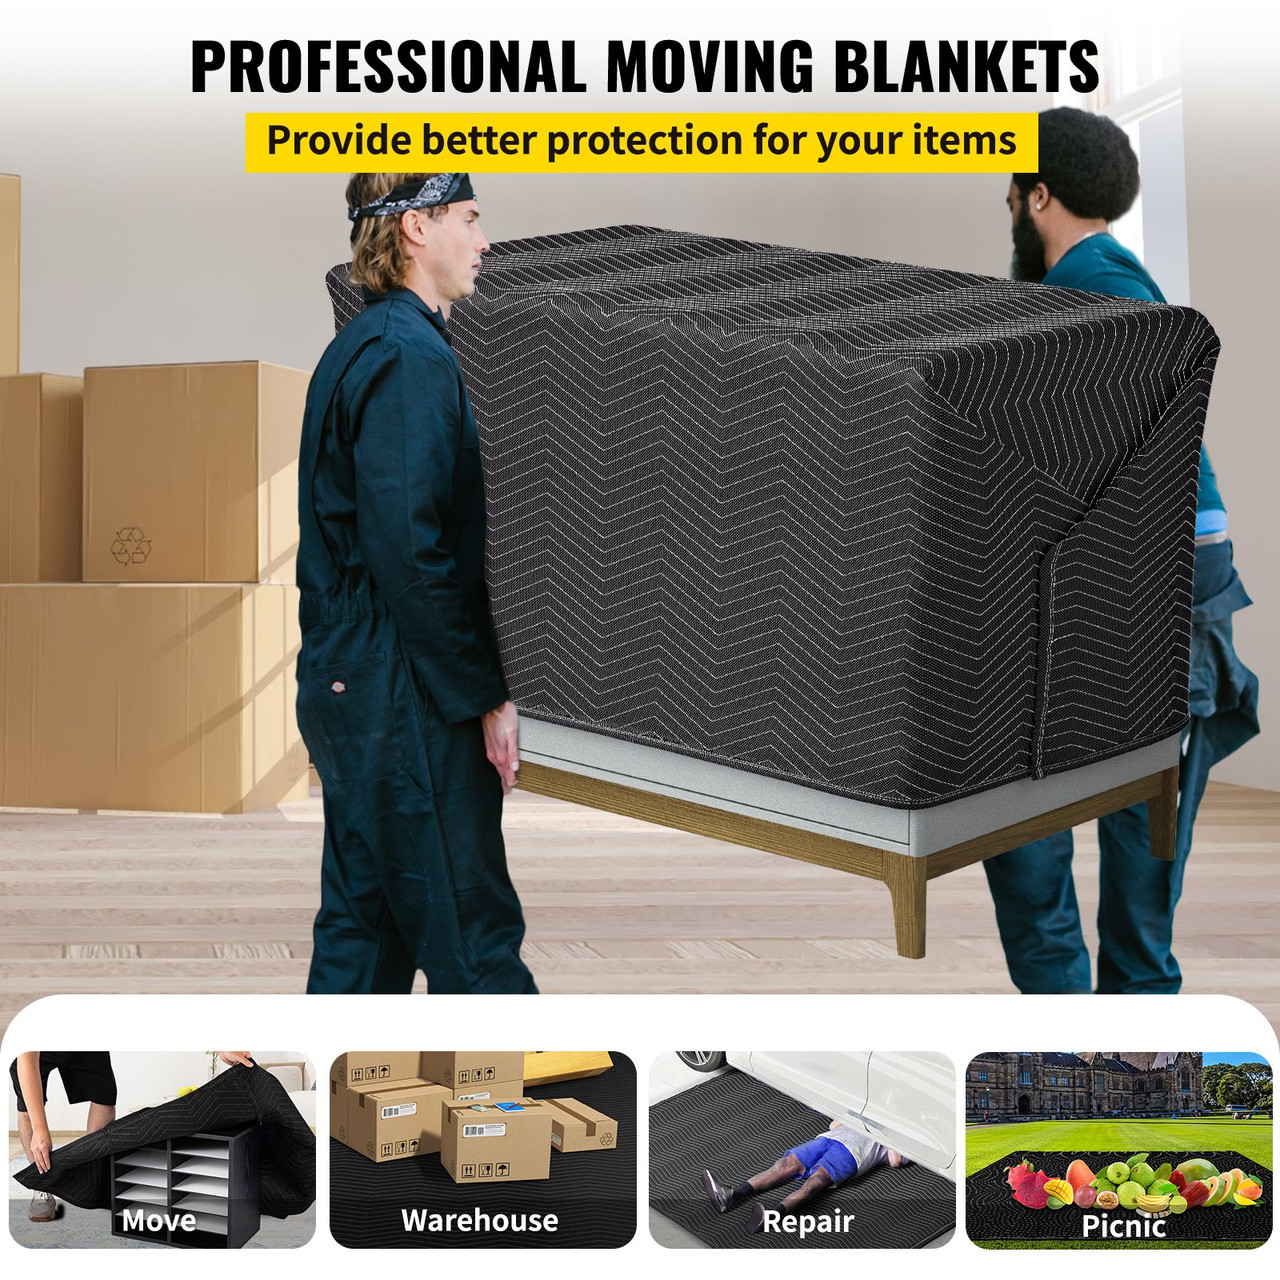 Moving Blankets, 80" x 72" (42 lb/dz Weight)-12 Packs, Professional Non-Woven & Recycled Cotton Packing Blanket, Heavy Duty Mover Pads for Protecting